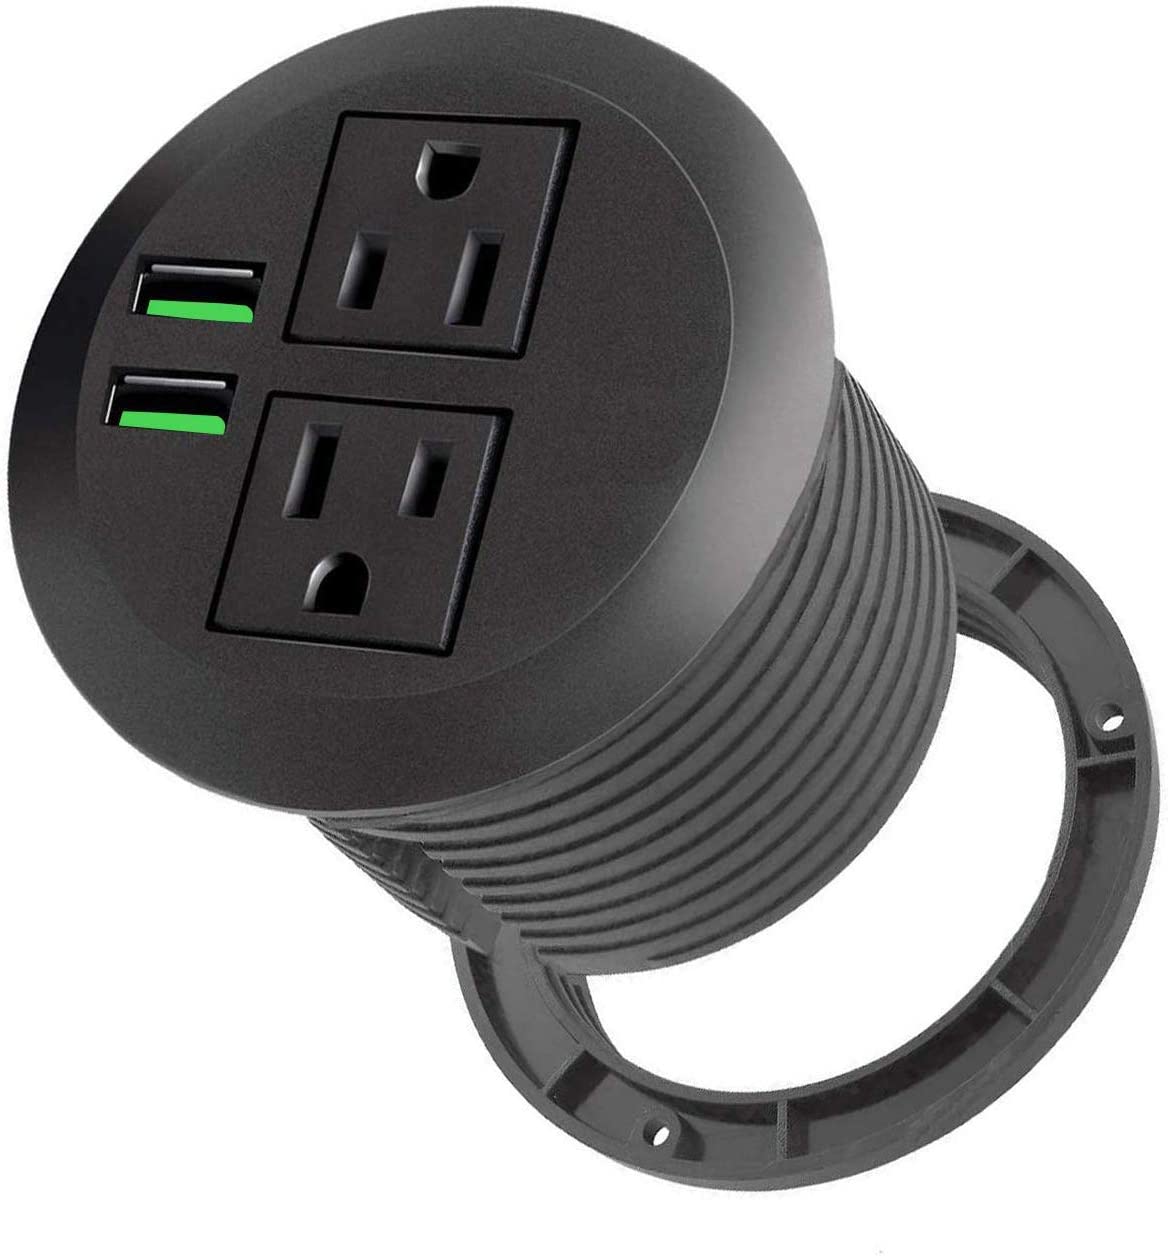 AC-USB outlet